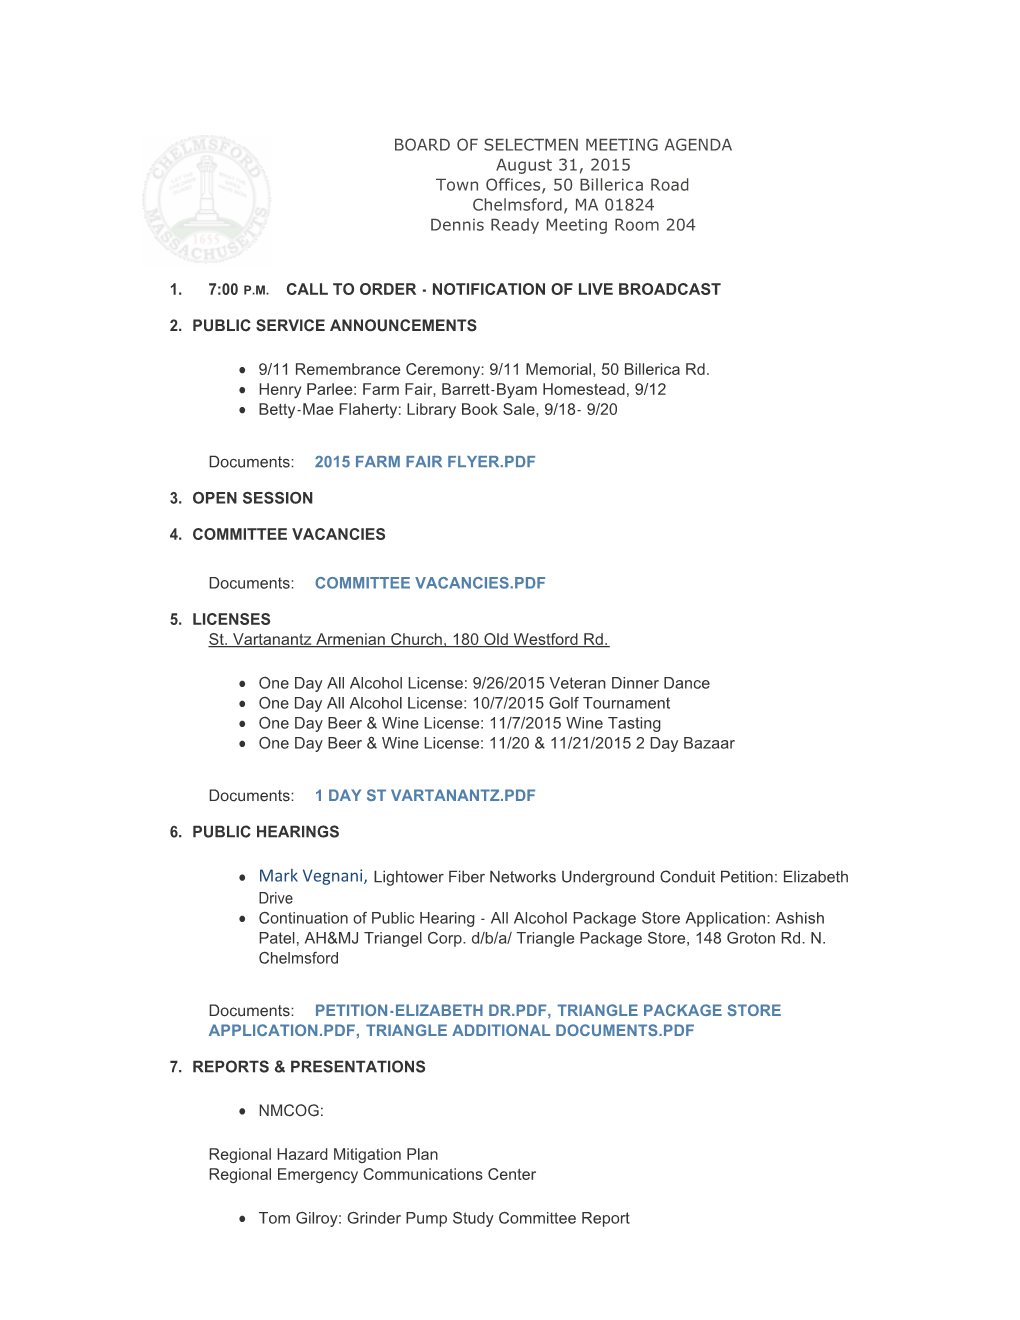 BOARD of SELECTMEN MEETING AGENDA August 31, 2015 Town Offices, 50 Billerica Road Chelmsford, MA 01824 Dennis Ready Meeting Room 204